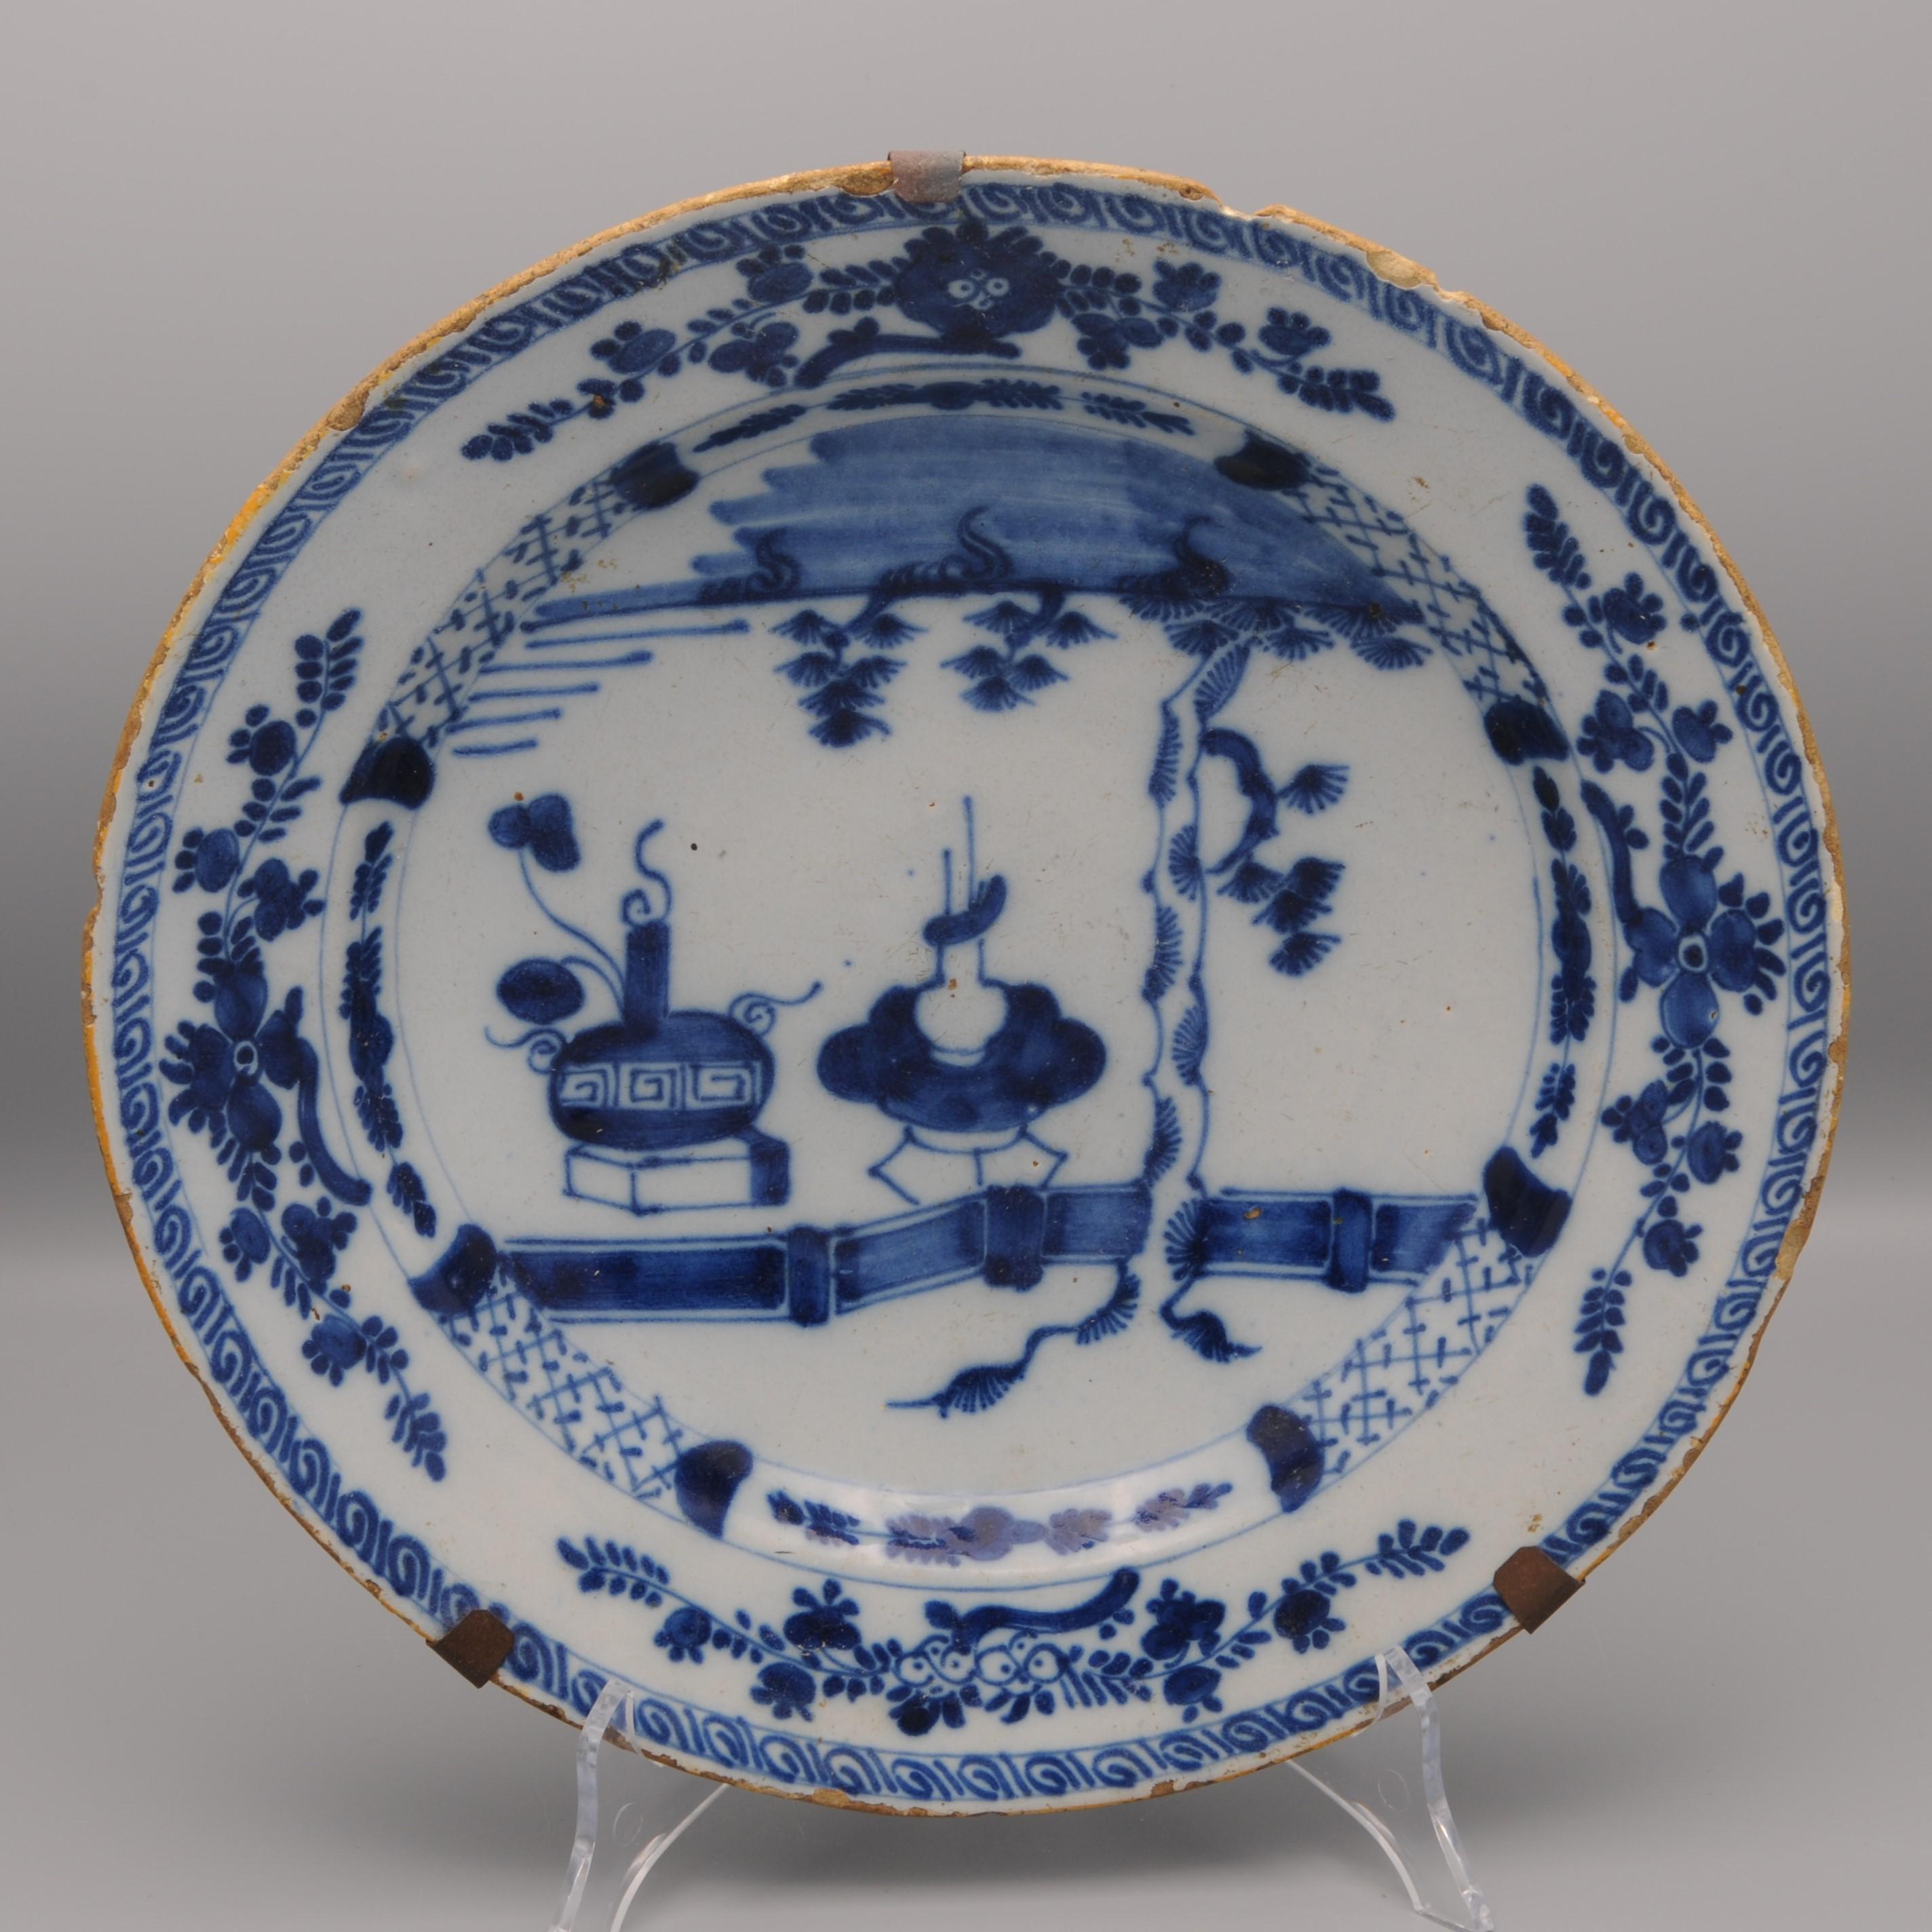 Mid 18th century Blue Delftware charger with Chinoiserie decor of 'precious gifts'.
Marked 'De Claauw' 
Mid 18th century 
Good quality of painting
Good condition; chips and usual wear to the rim